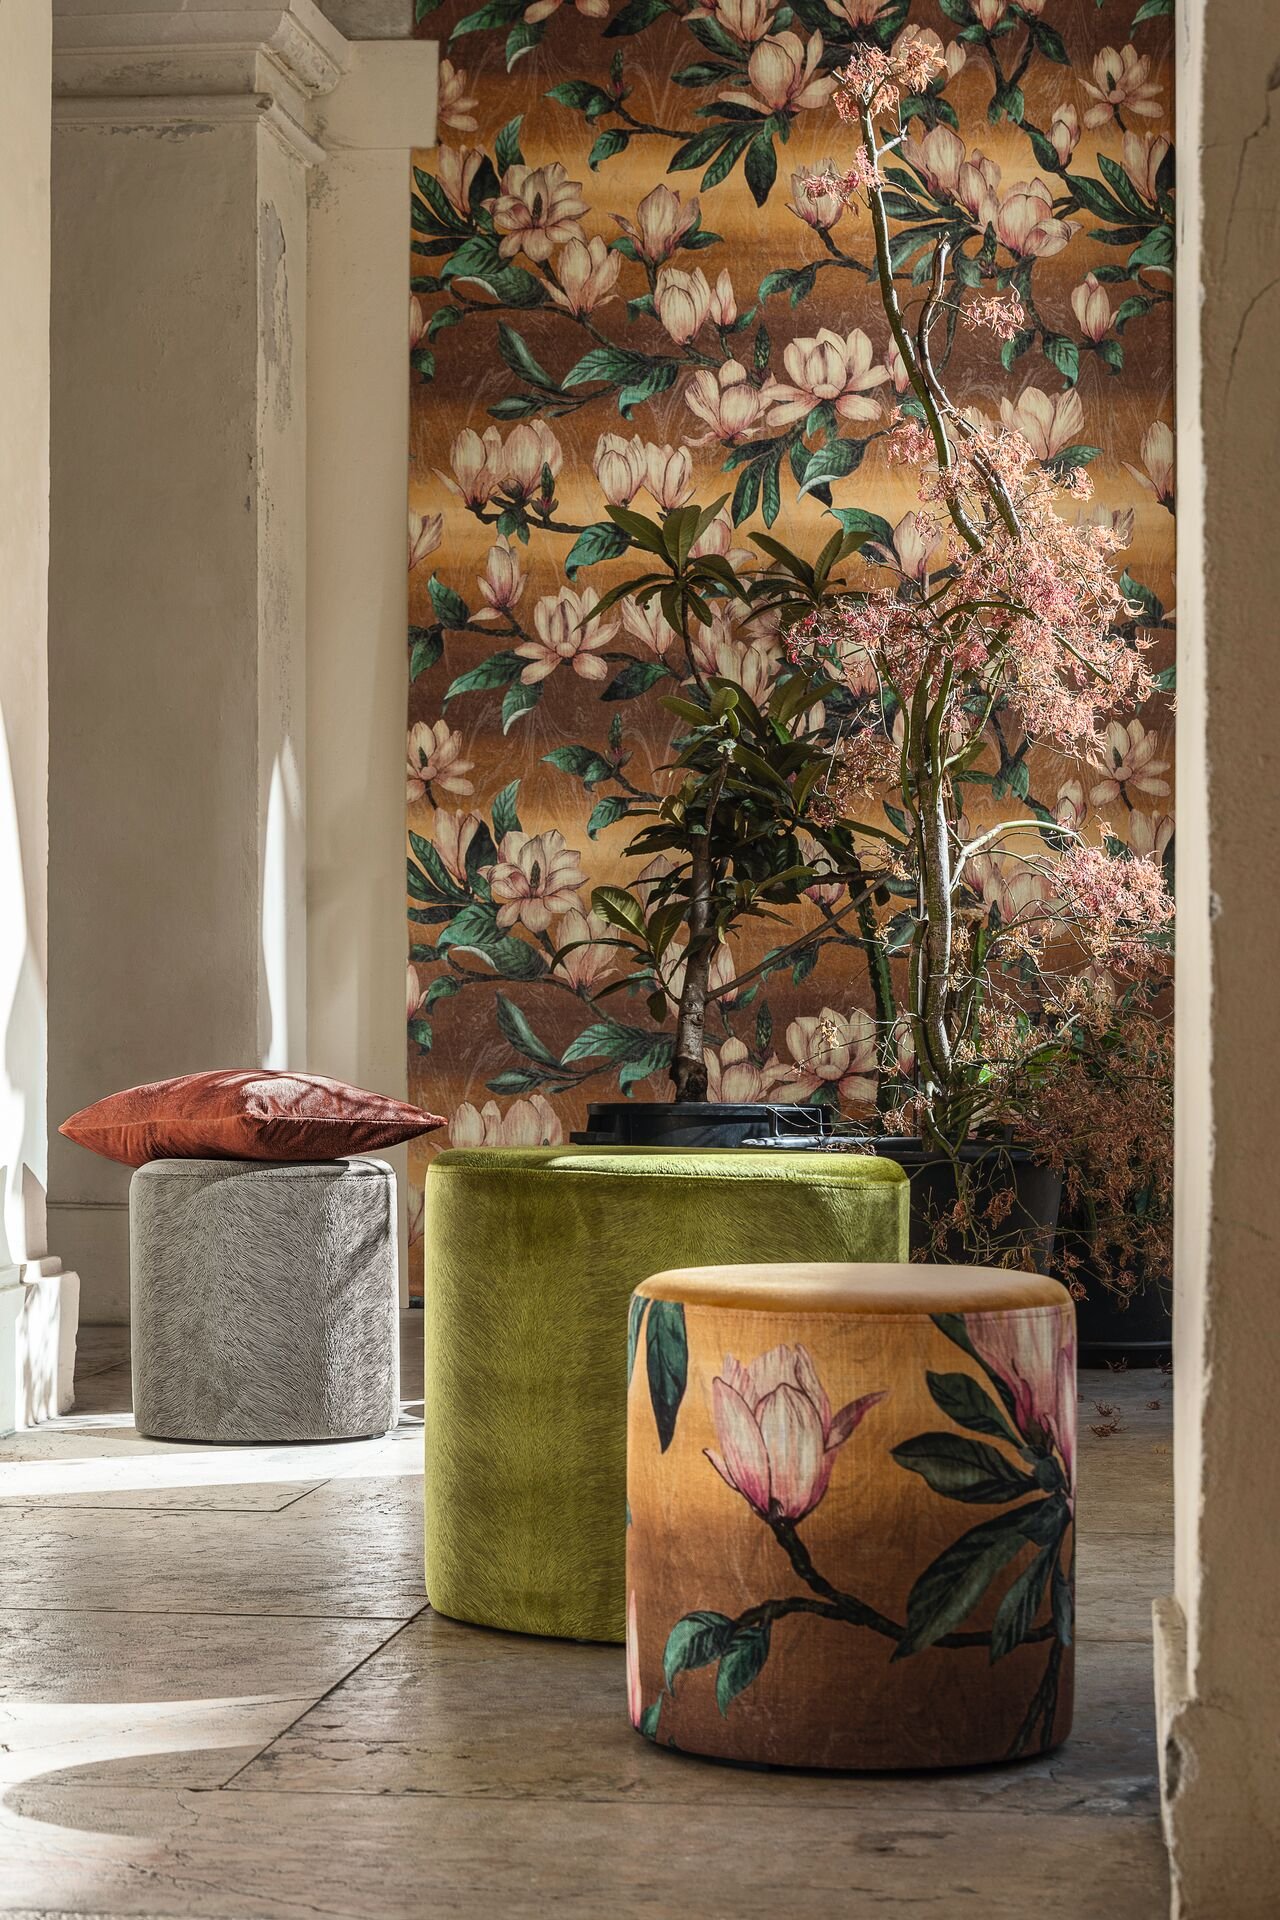  Gardens are a source of relaxation. They give us energy and delight us with their diversity and life. MYSTERIOUS GARDENS transforms rooms into gardens. Inspired by the beauty of nature the color palettes in the collection create an optimistic spirit